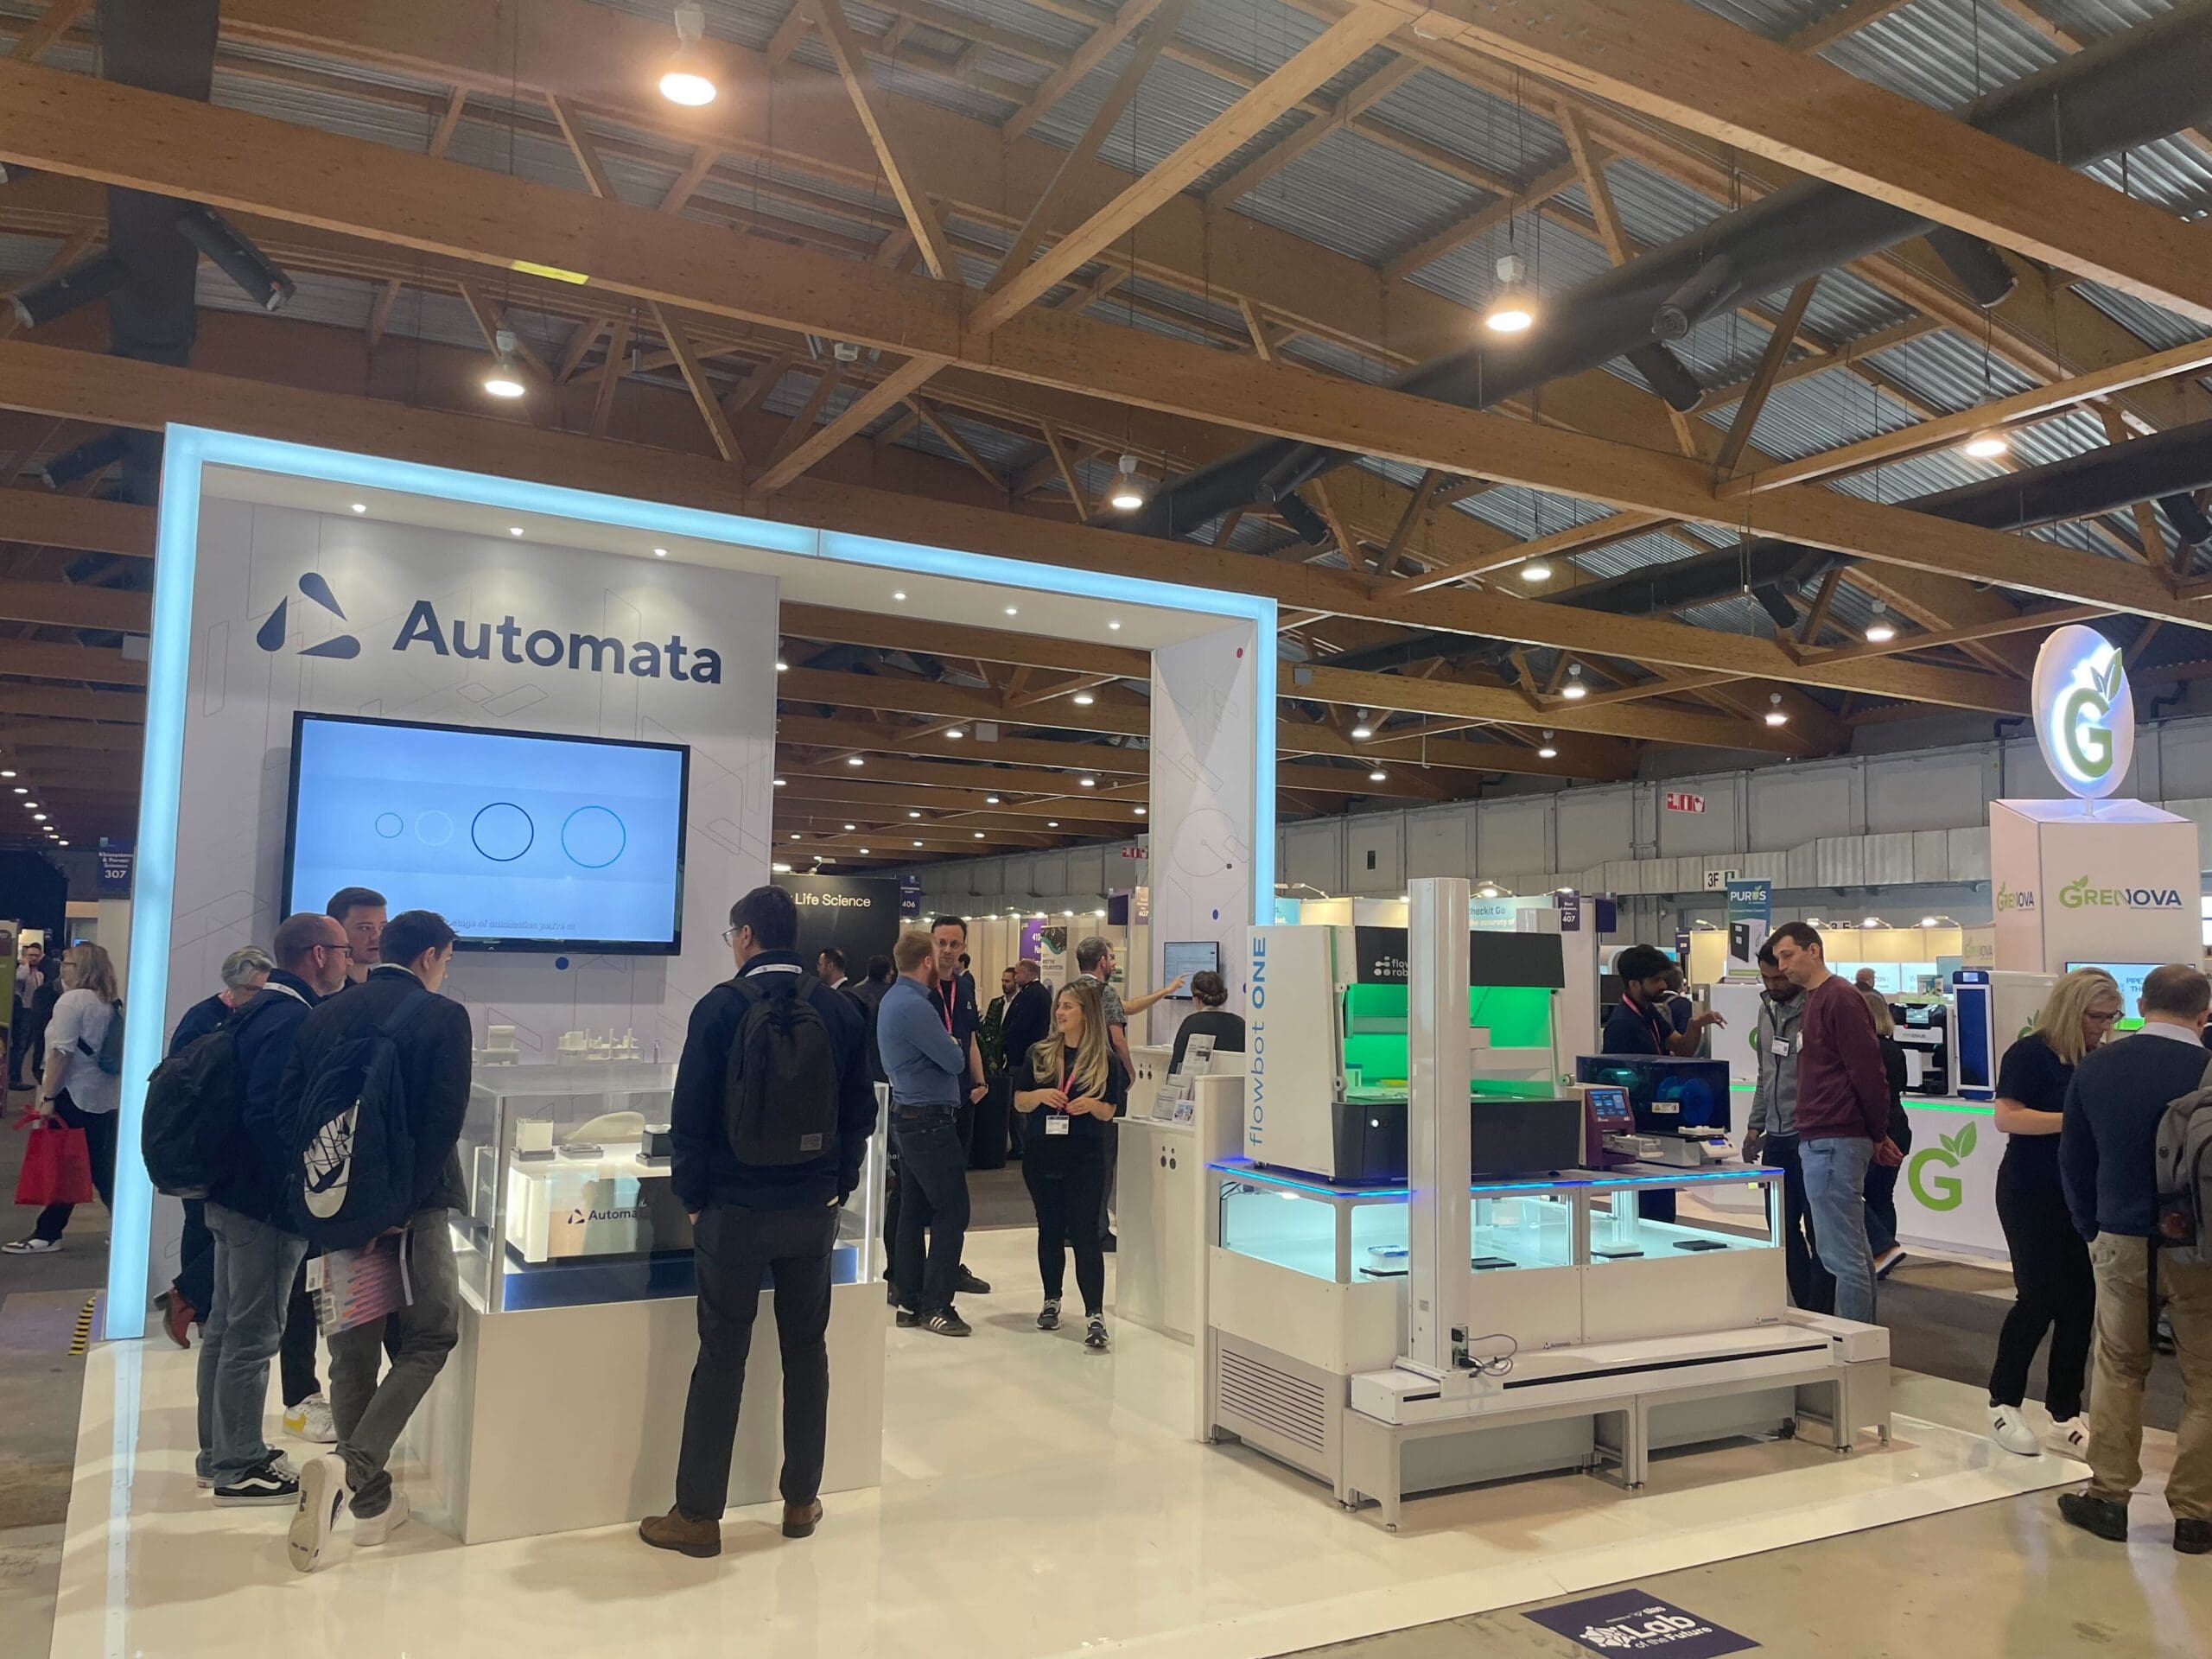 Automata's SLAS Europe 2023 stand, surrounded by delegates from the conference looking at LINQ.